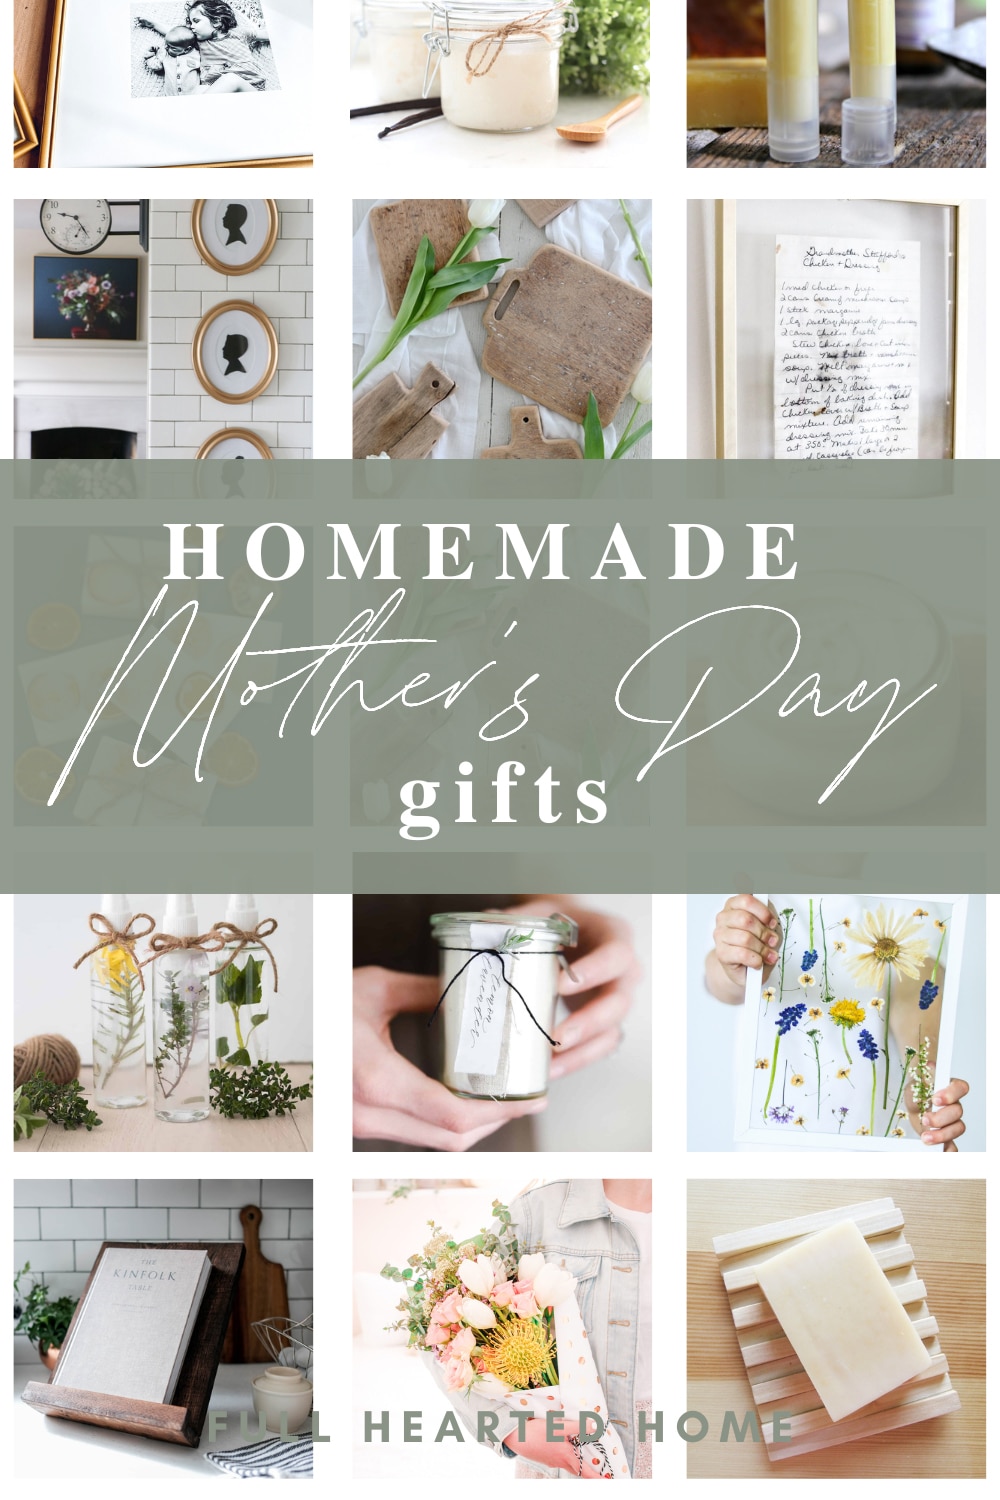 DIY Mother’s Day Gifts